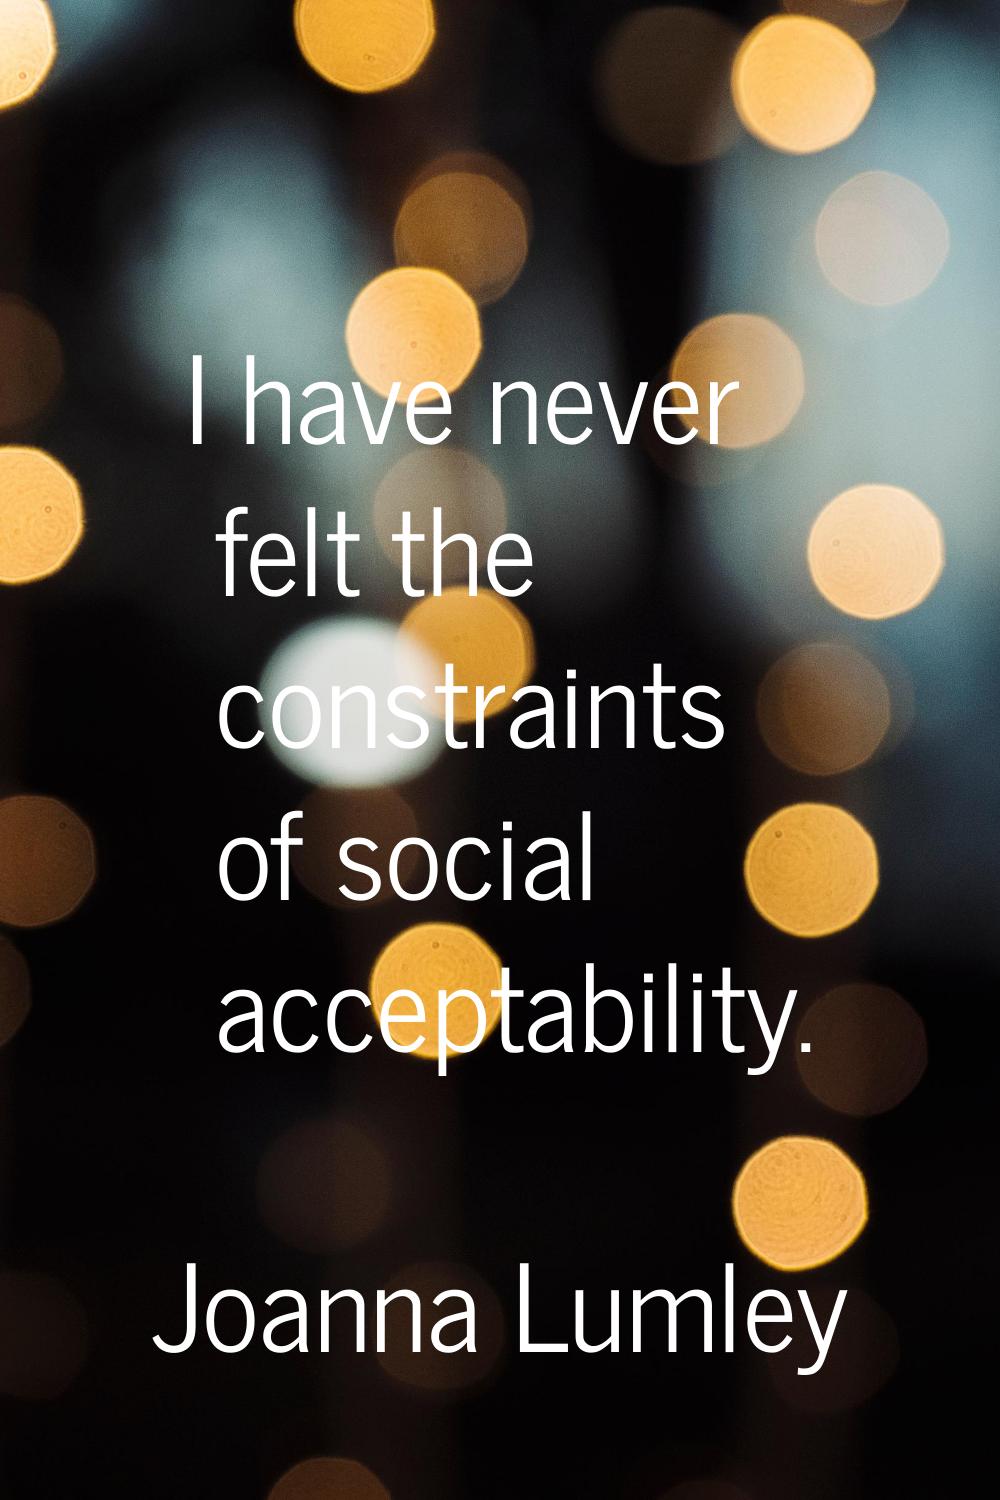 I have never felt the constraints of social acceptability.